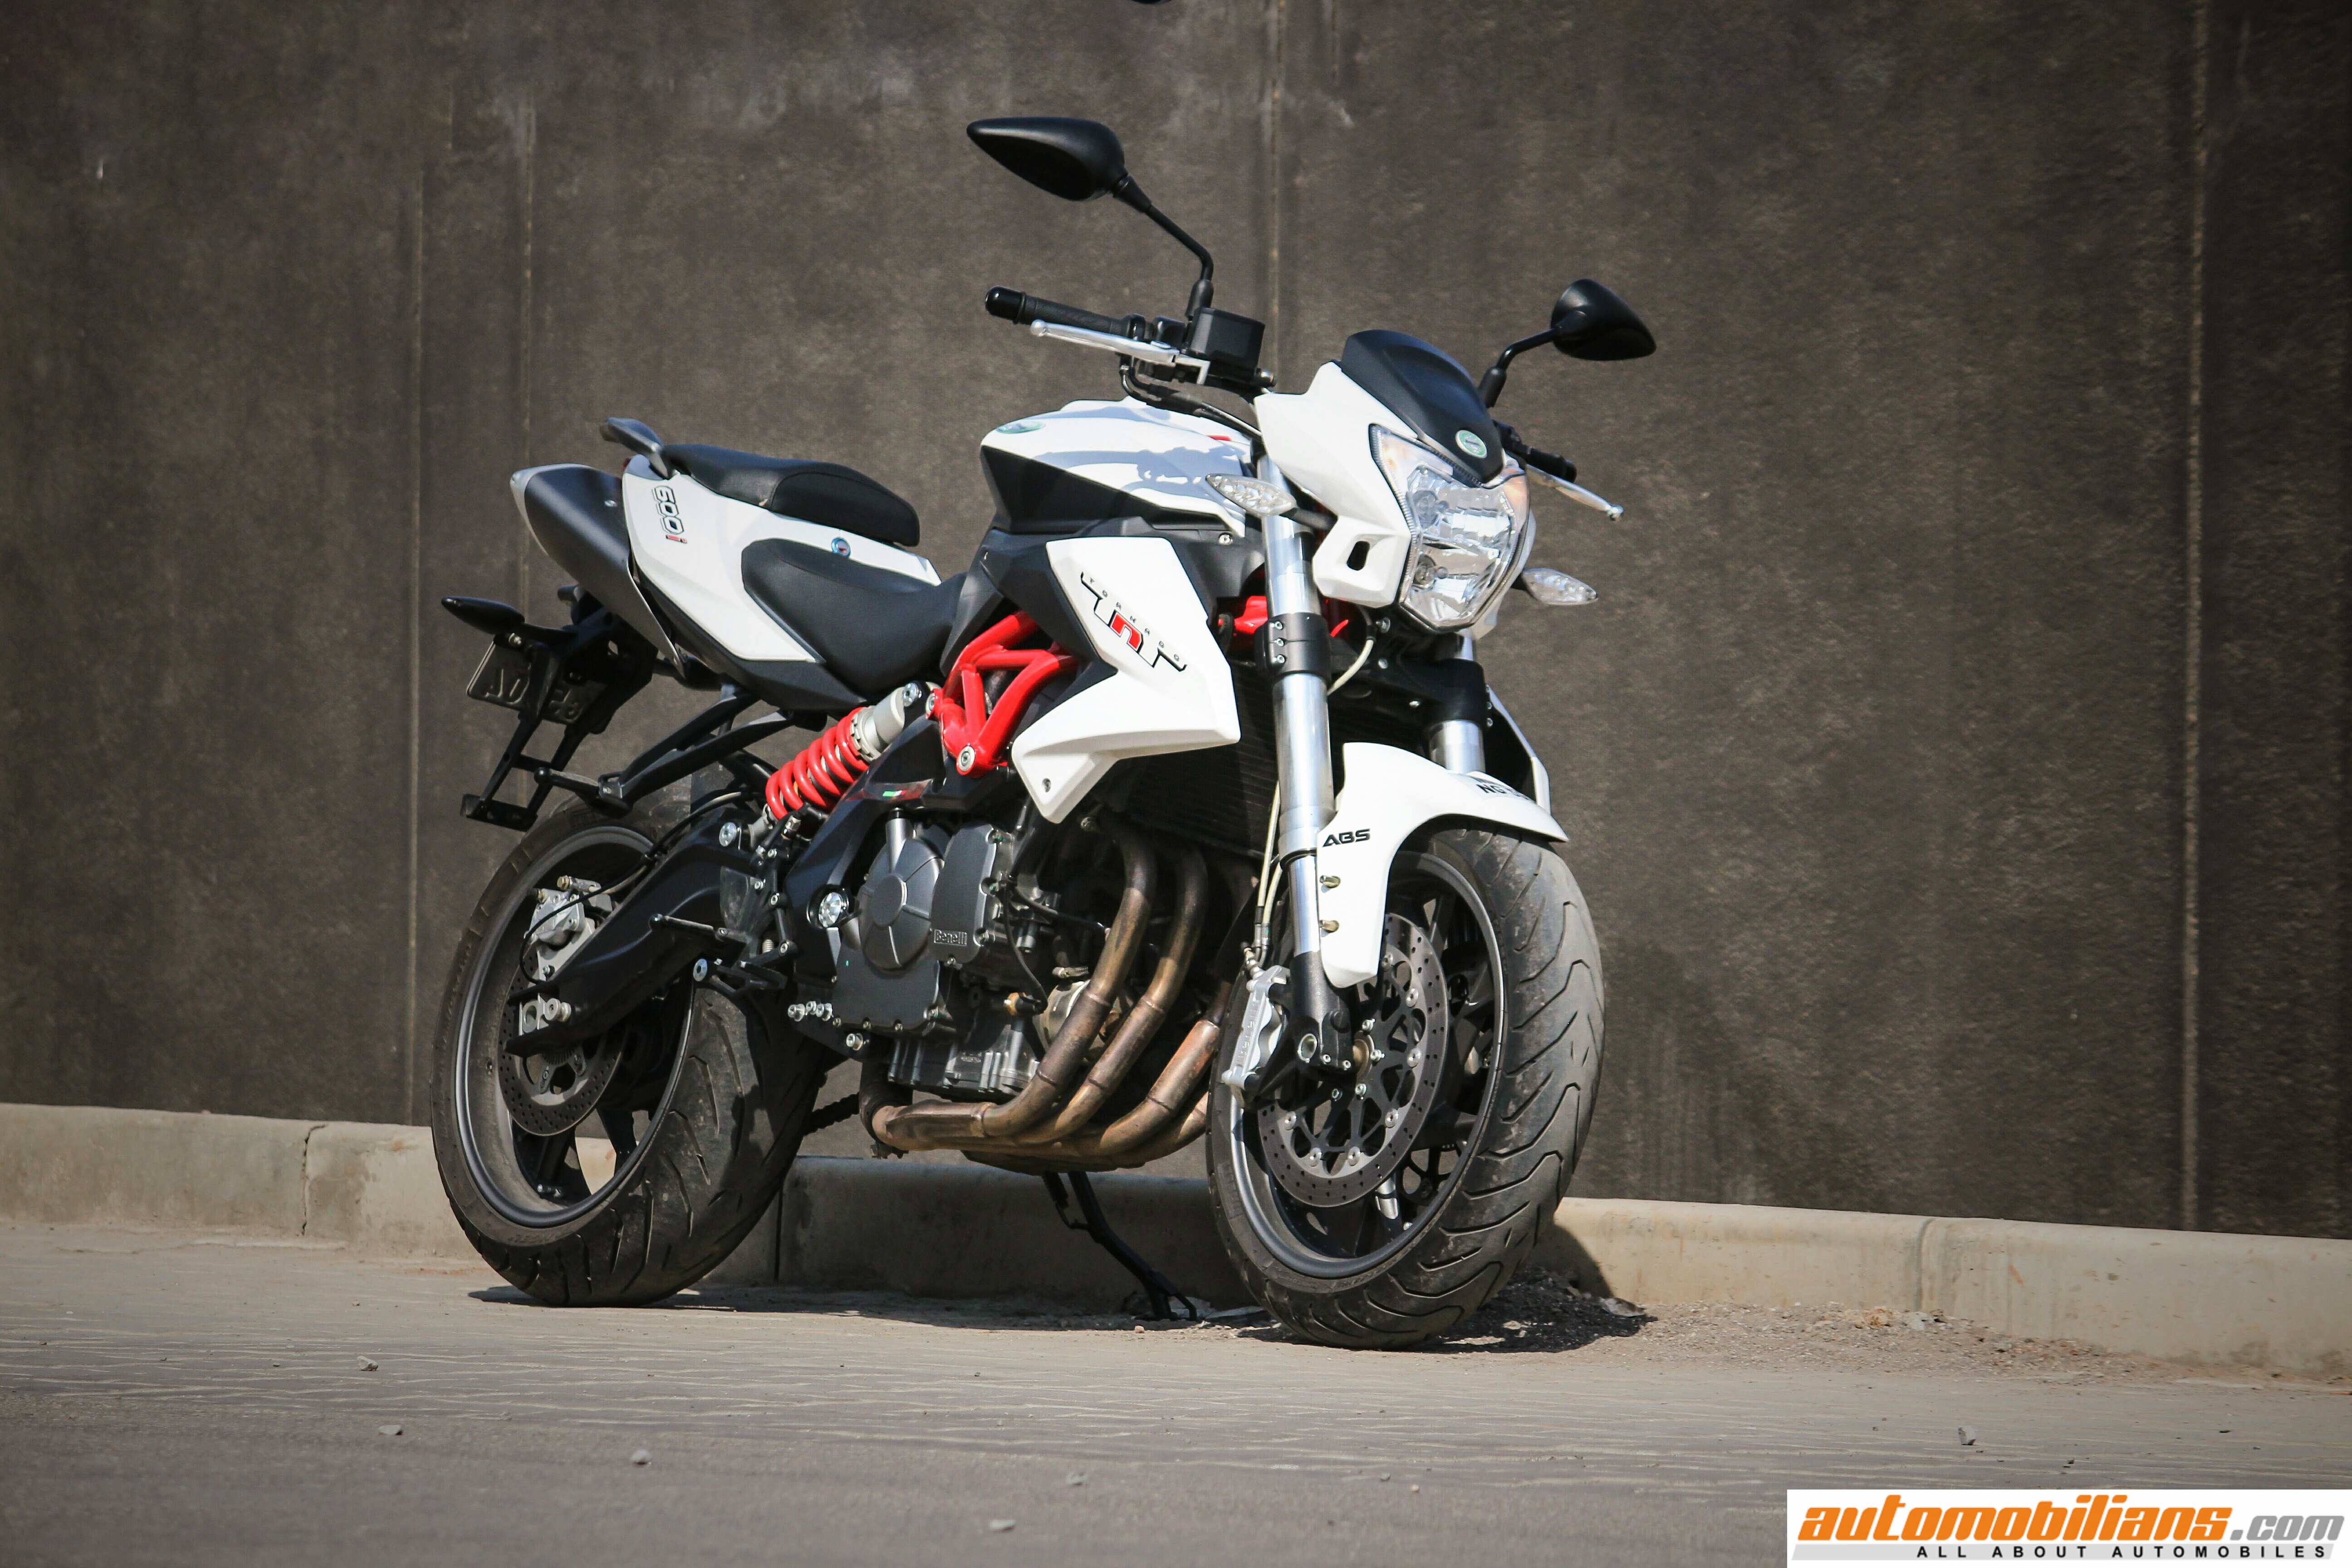 Benelli-TNT-600i-ABS-Test-Drive-Review-A